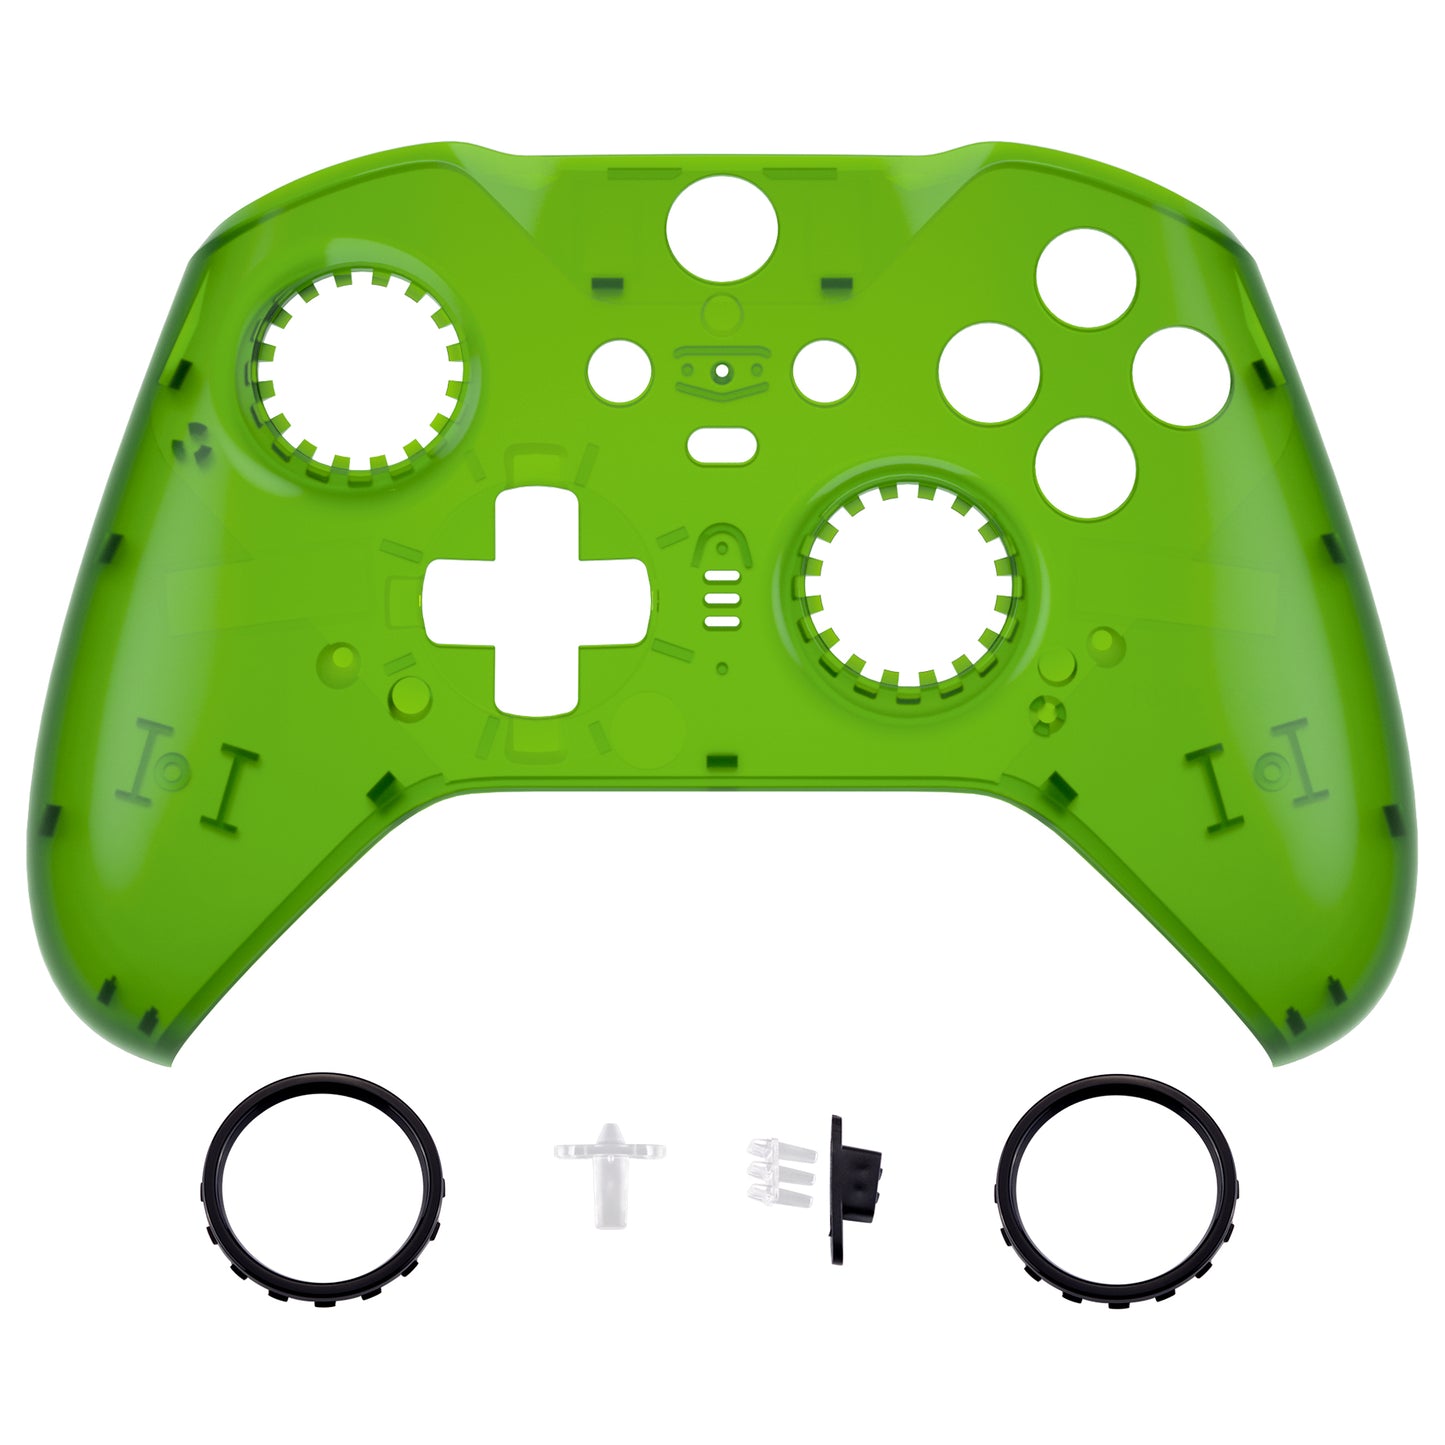 Clear Green Faceplate Cover, Front Housing Shell Case Replacement Kit for Xbox One Elite Series 2 Controller Model 1797 - Thumbstick Accent Rings Included - ELM505 eXtremeRate